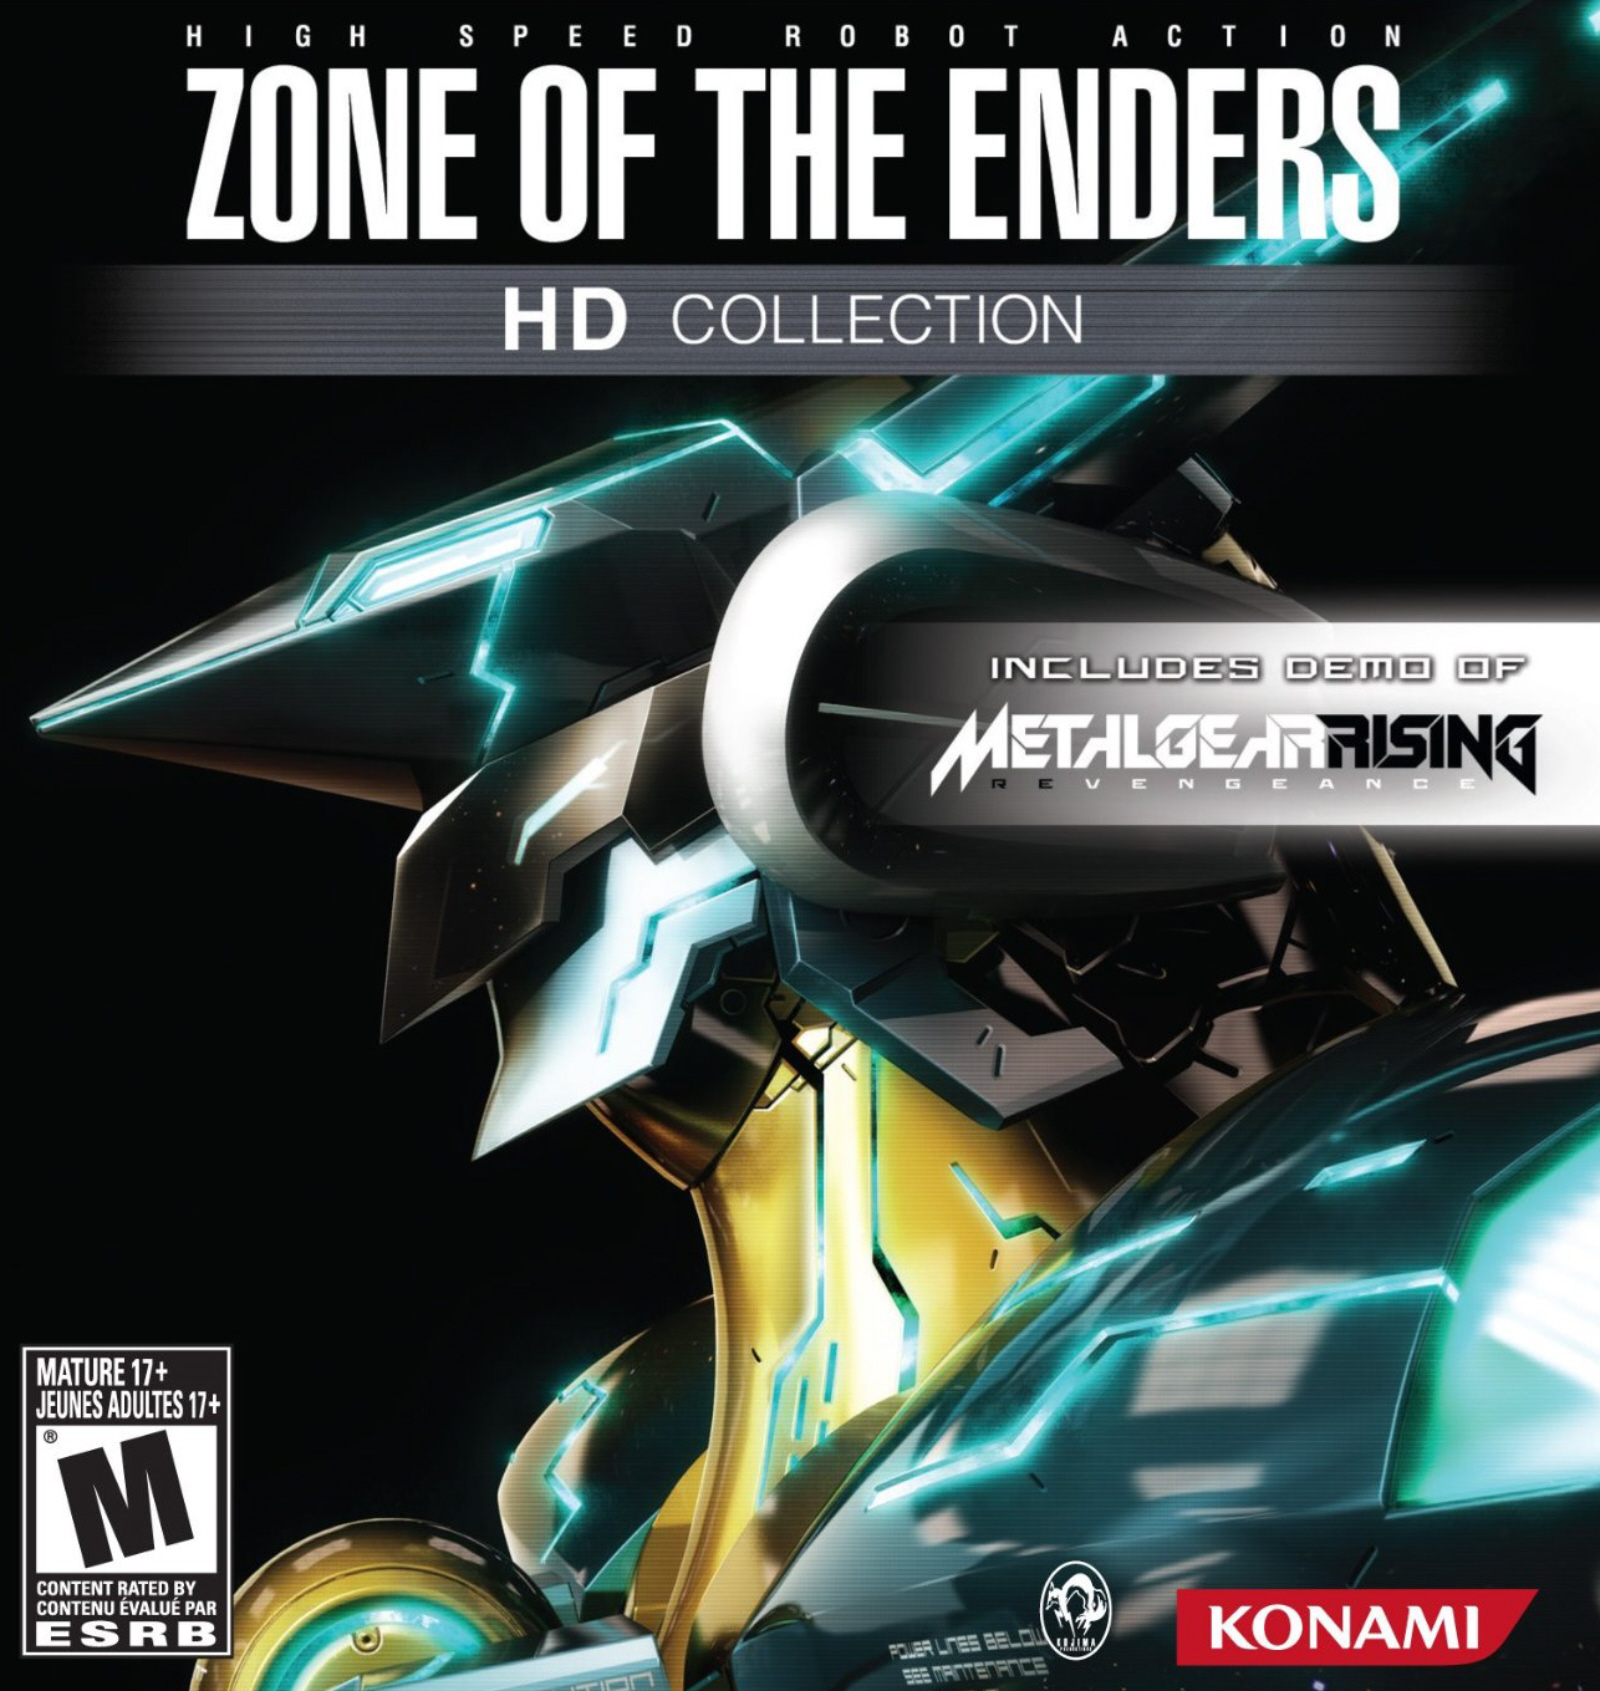 zone-of-the-enders-hd-collection-box-artwork-usa.jpg